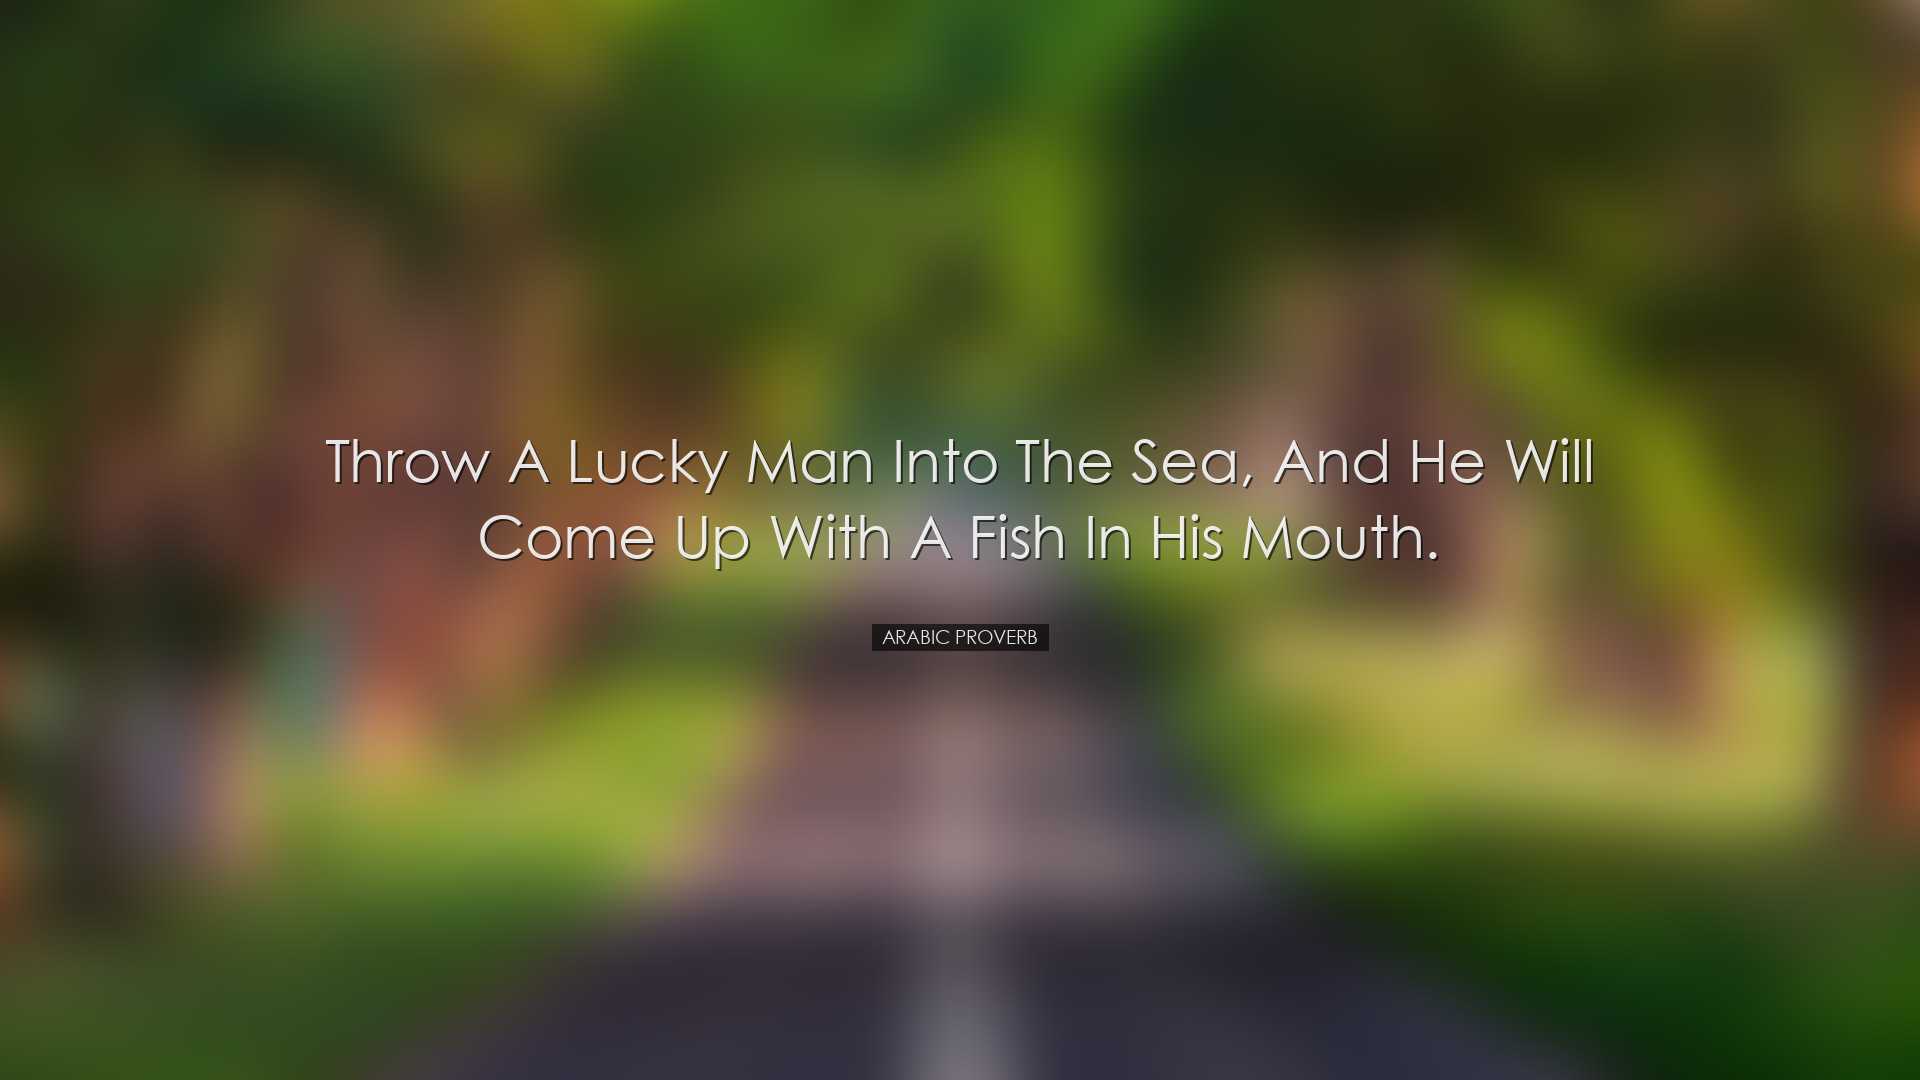 Throw a lucky man into the sea, and he will come up with a fish in